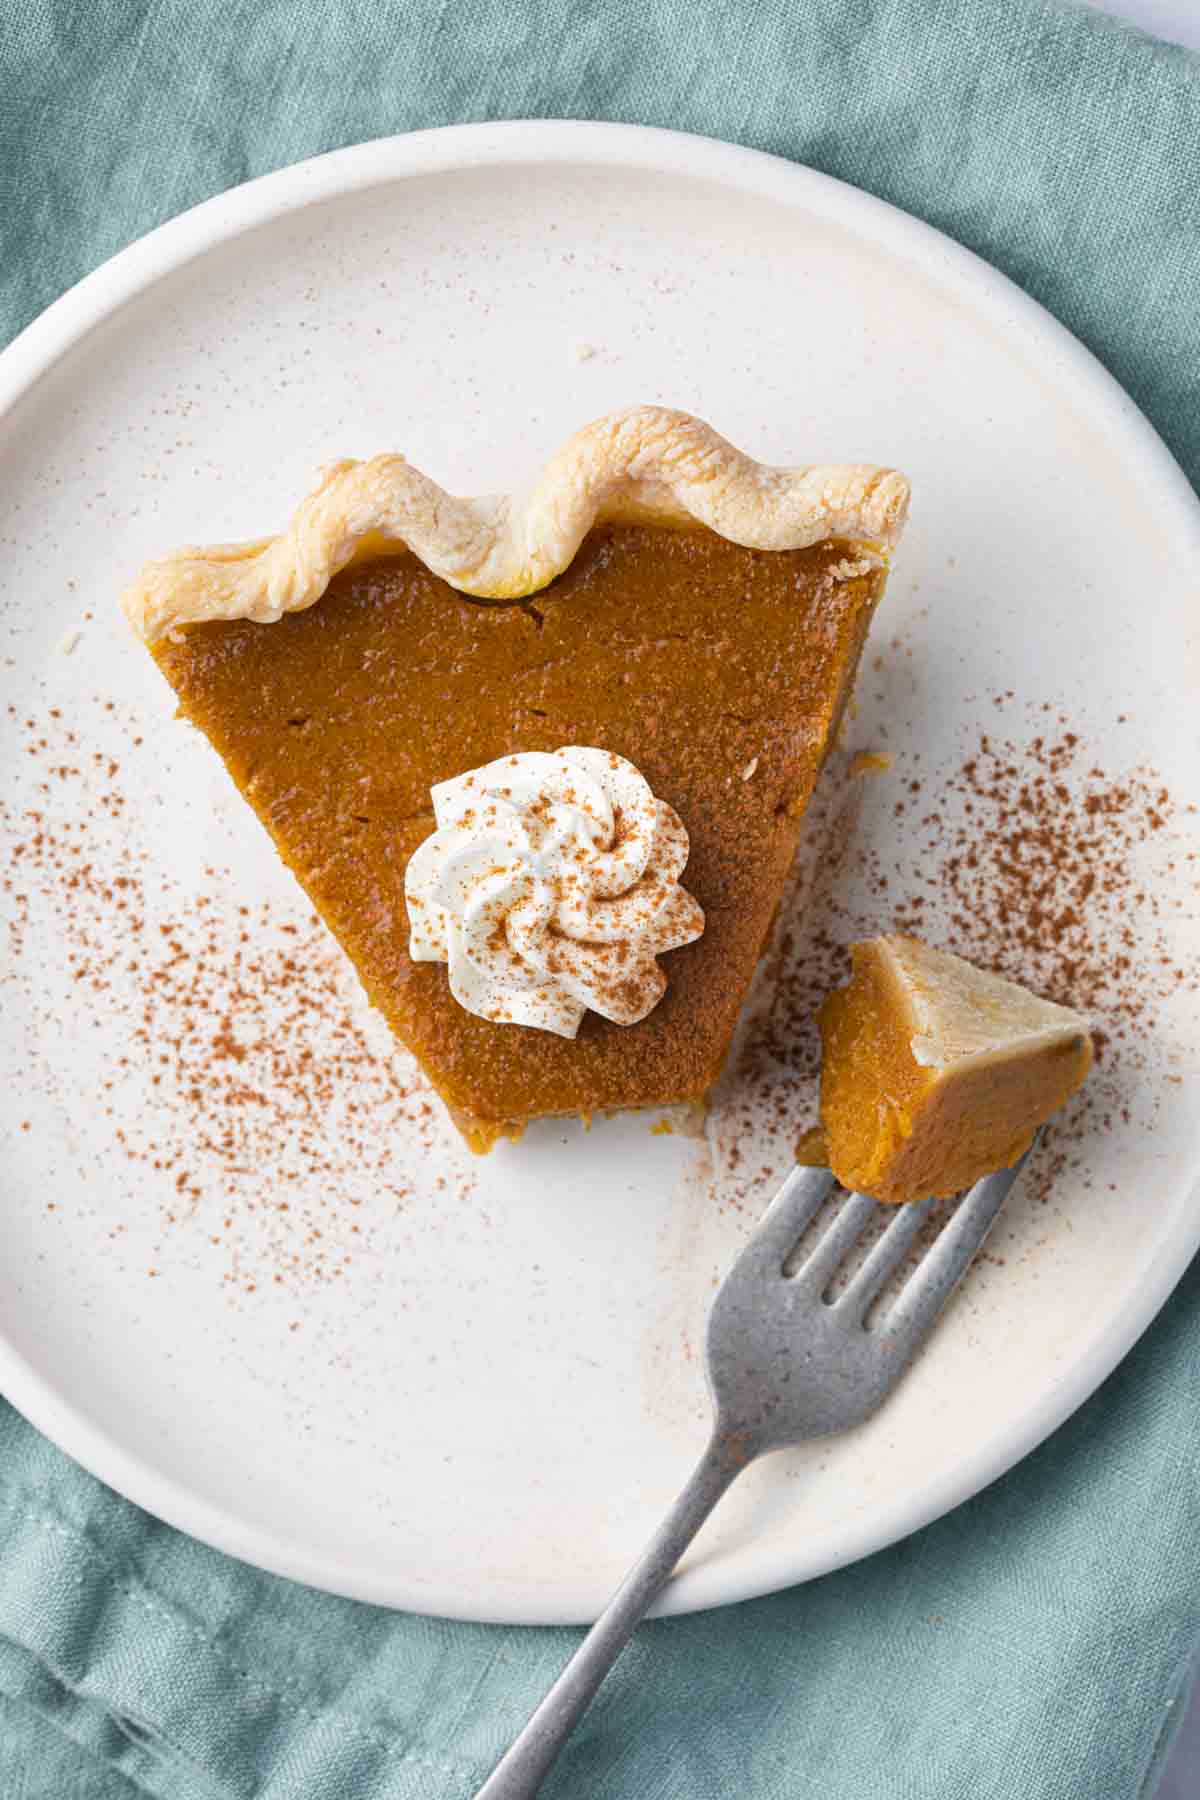 Plate of pumpkin pie with bite taken out